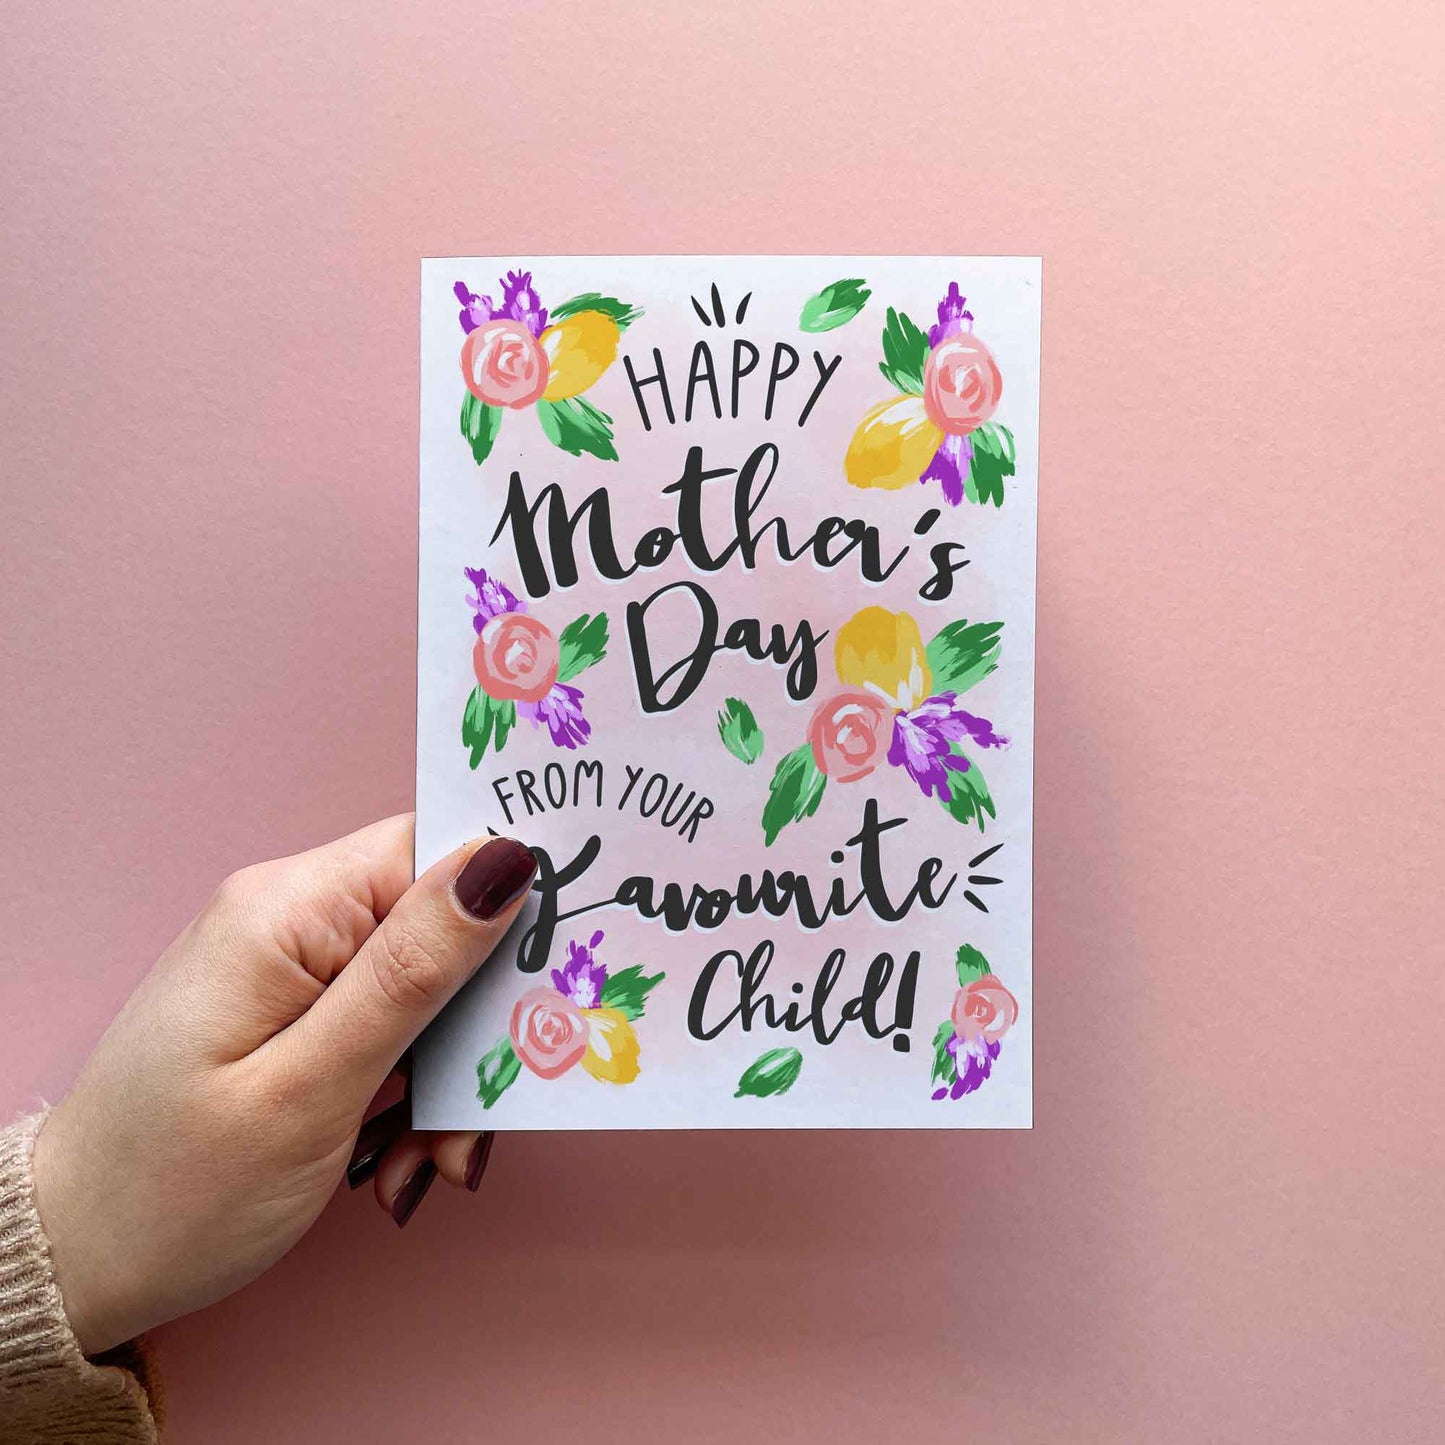 Let them know who the "real" favourite is with our hilarious Mother's Day card! Adorned with sassy lettering, it's a surefire way to make her laugh (and one up your sibling) this Mother's Day. You can show 'em that you care in an eco-friendly way with FSC certified paper and compostable packaging, too!